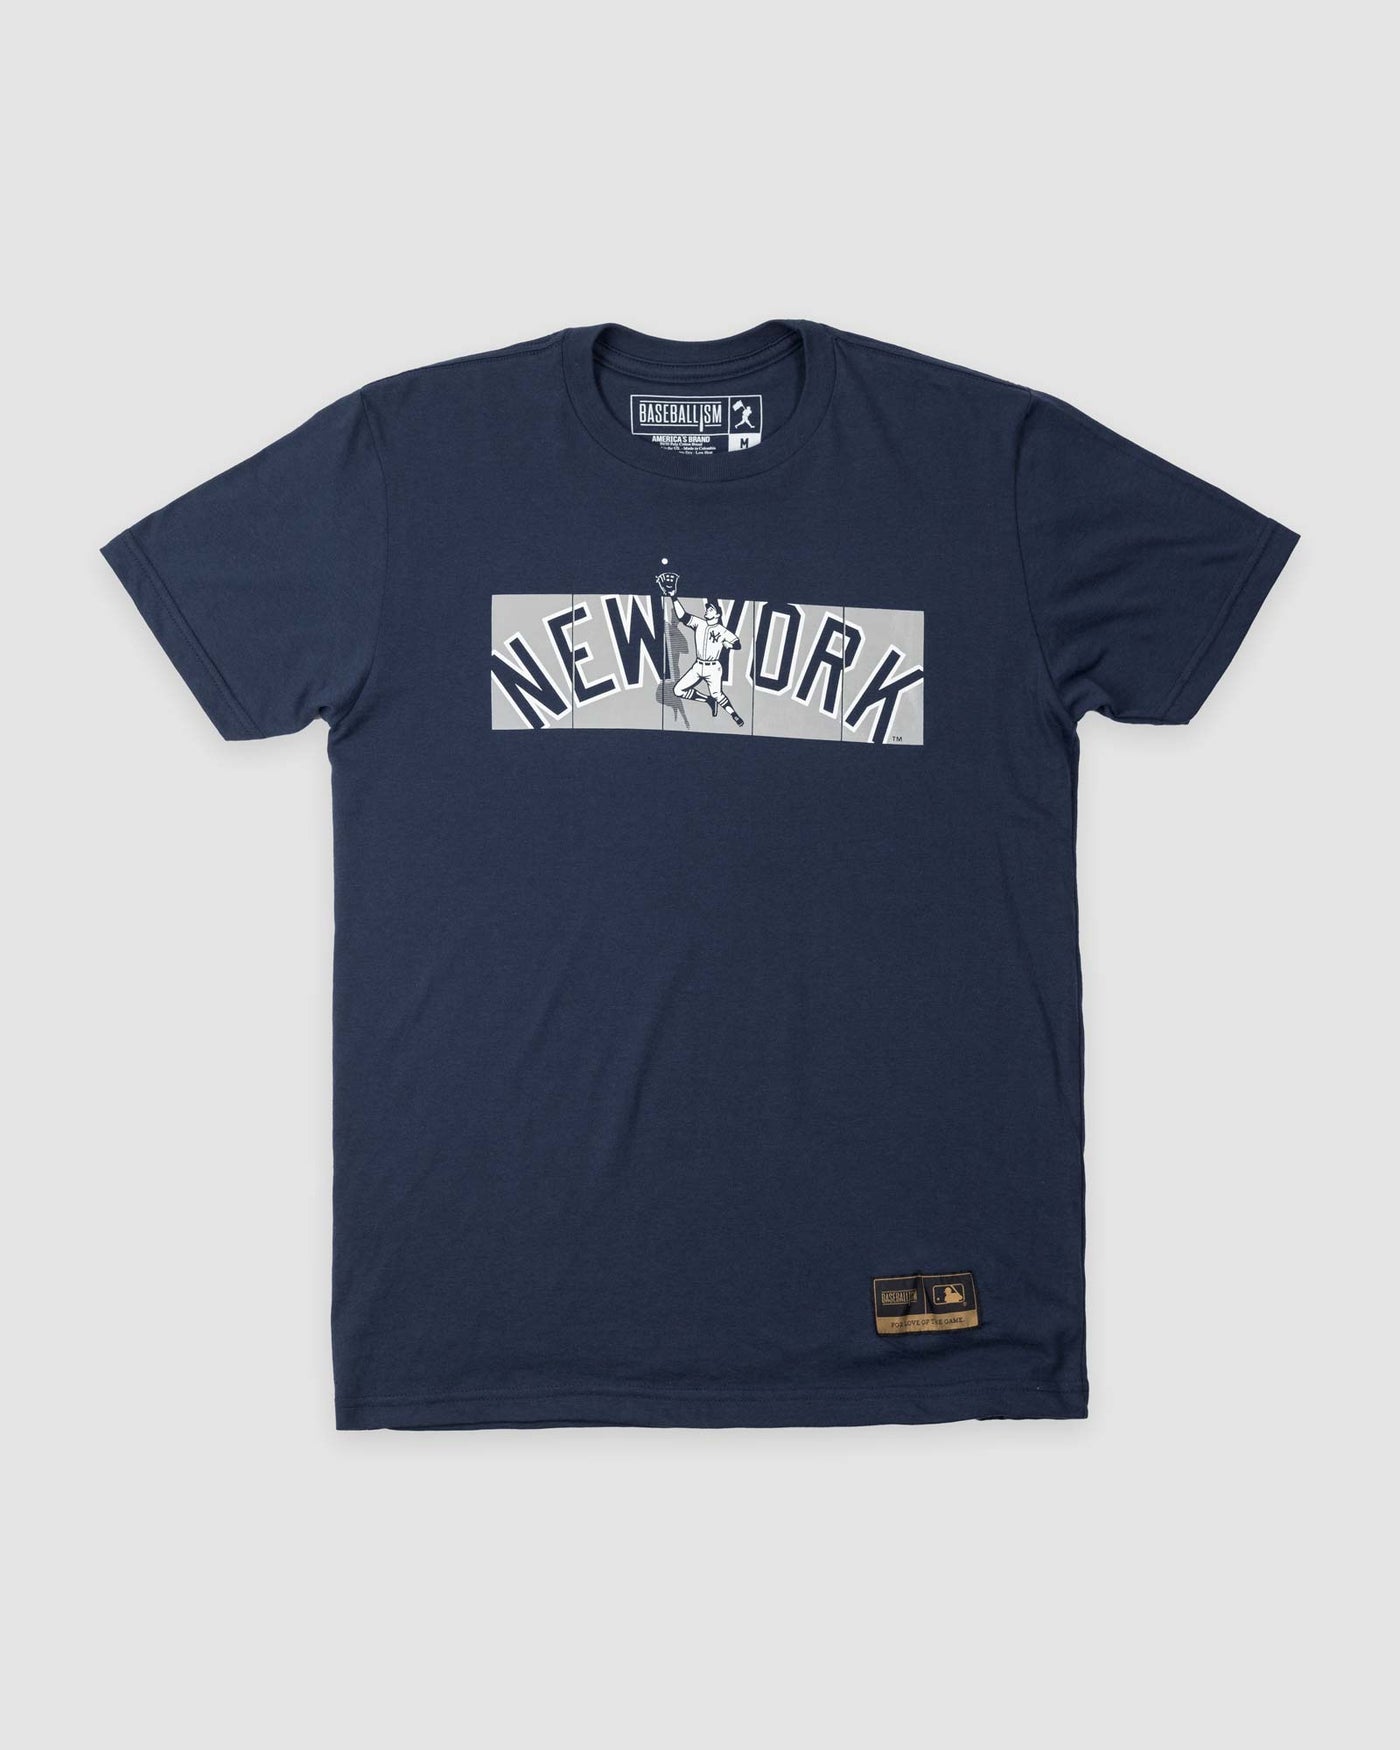 Outfield Fence Tee - New York Yankees